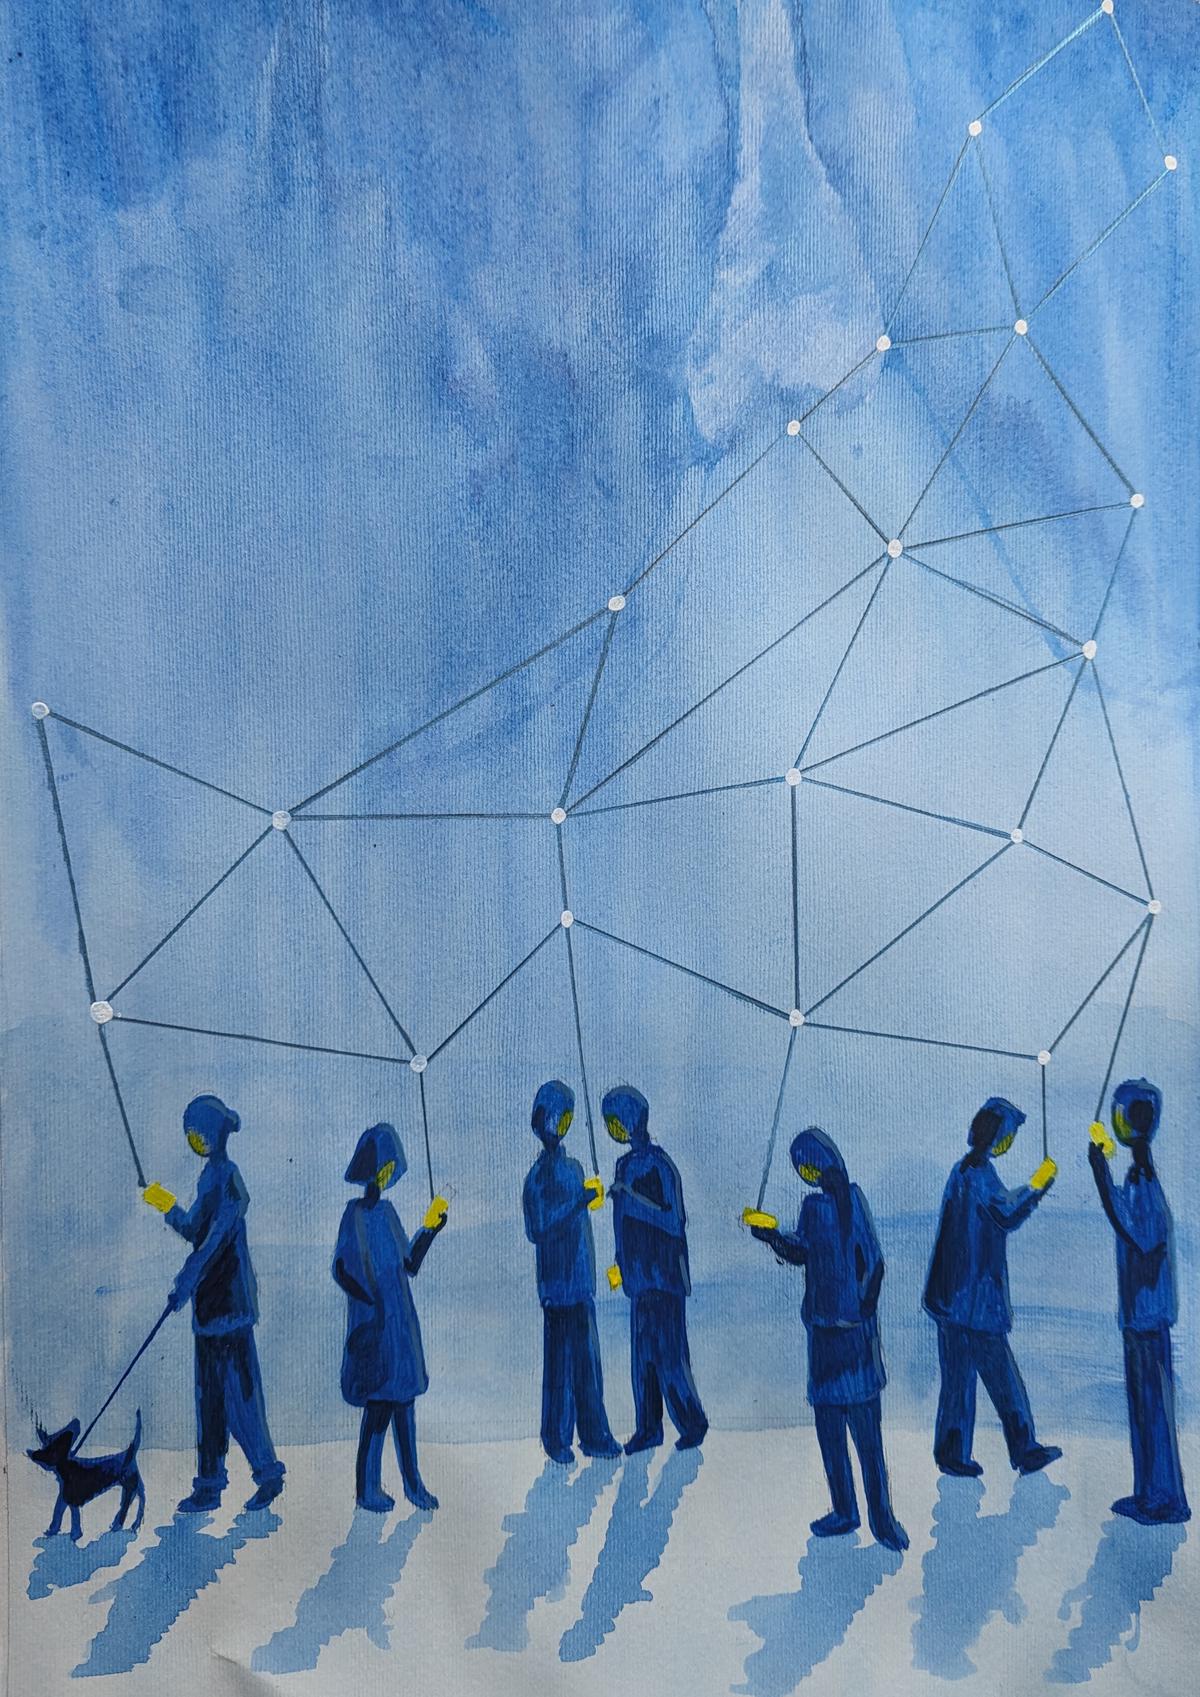 Illustration of people on digital devices with line drawing of network behind them across the sky.